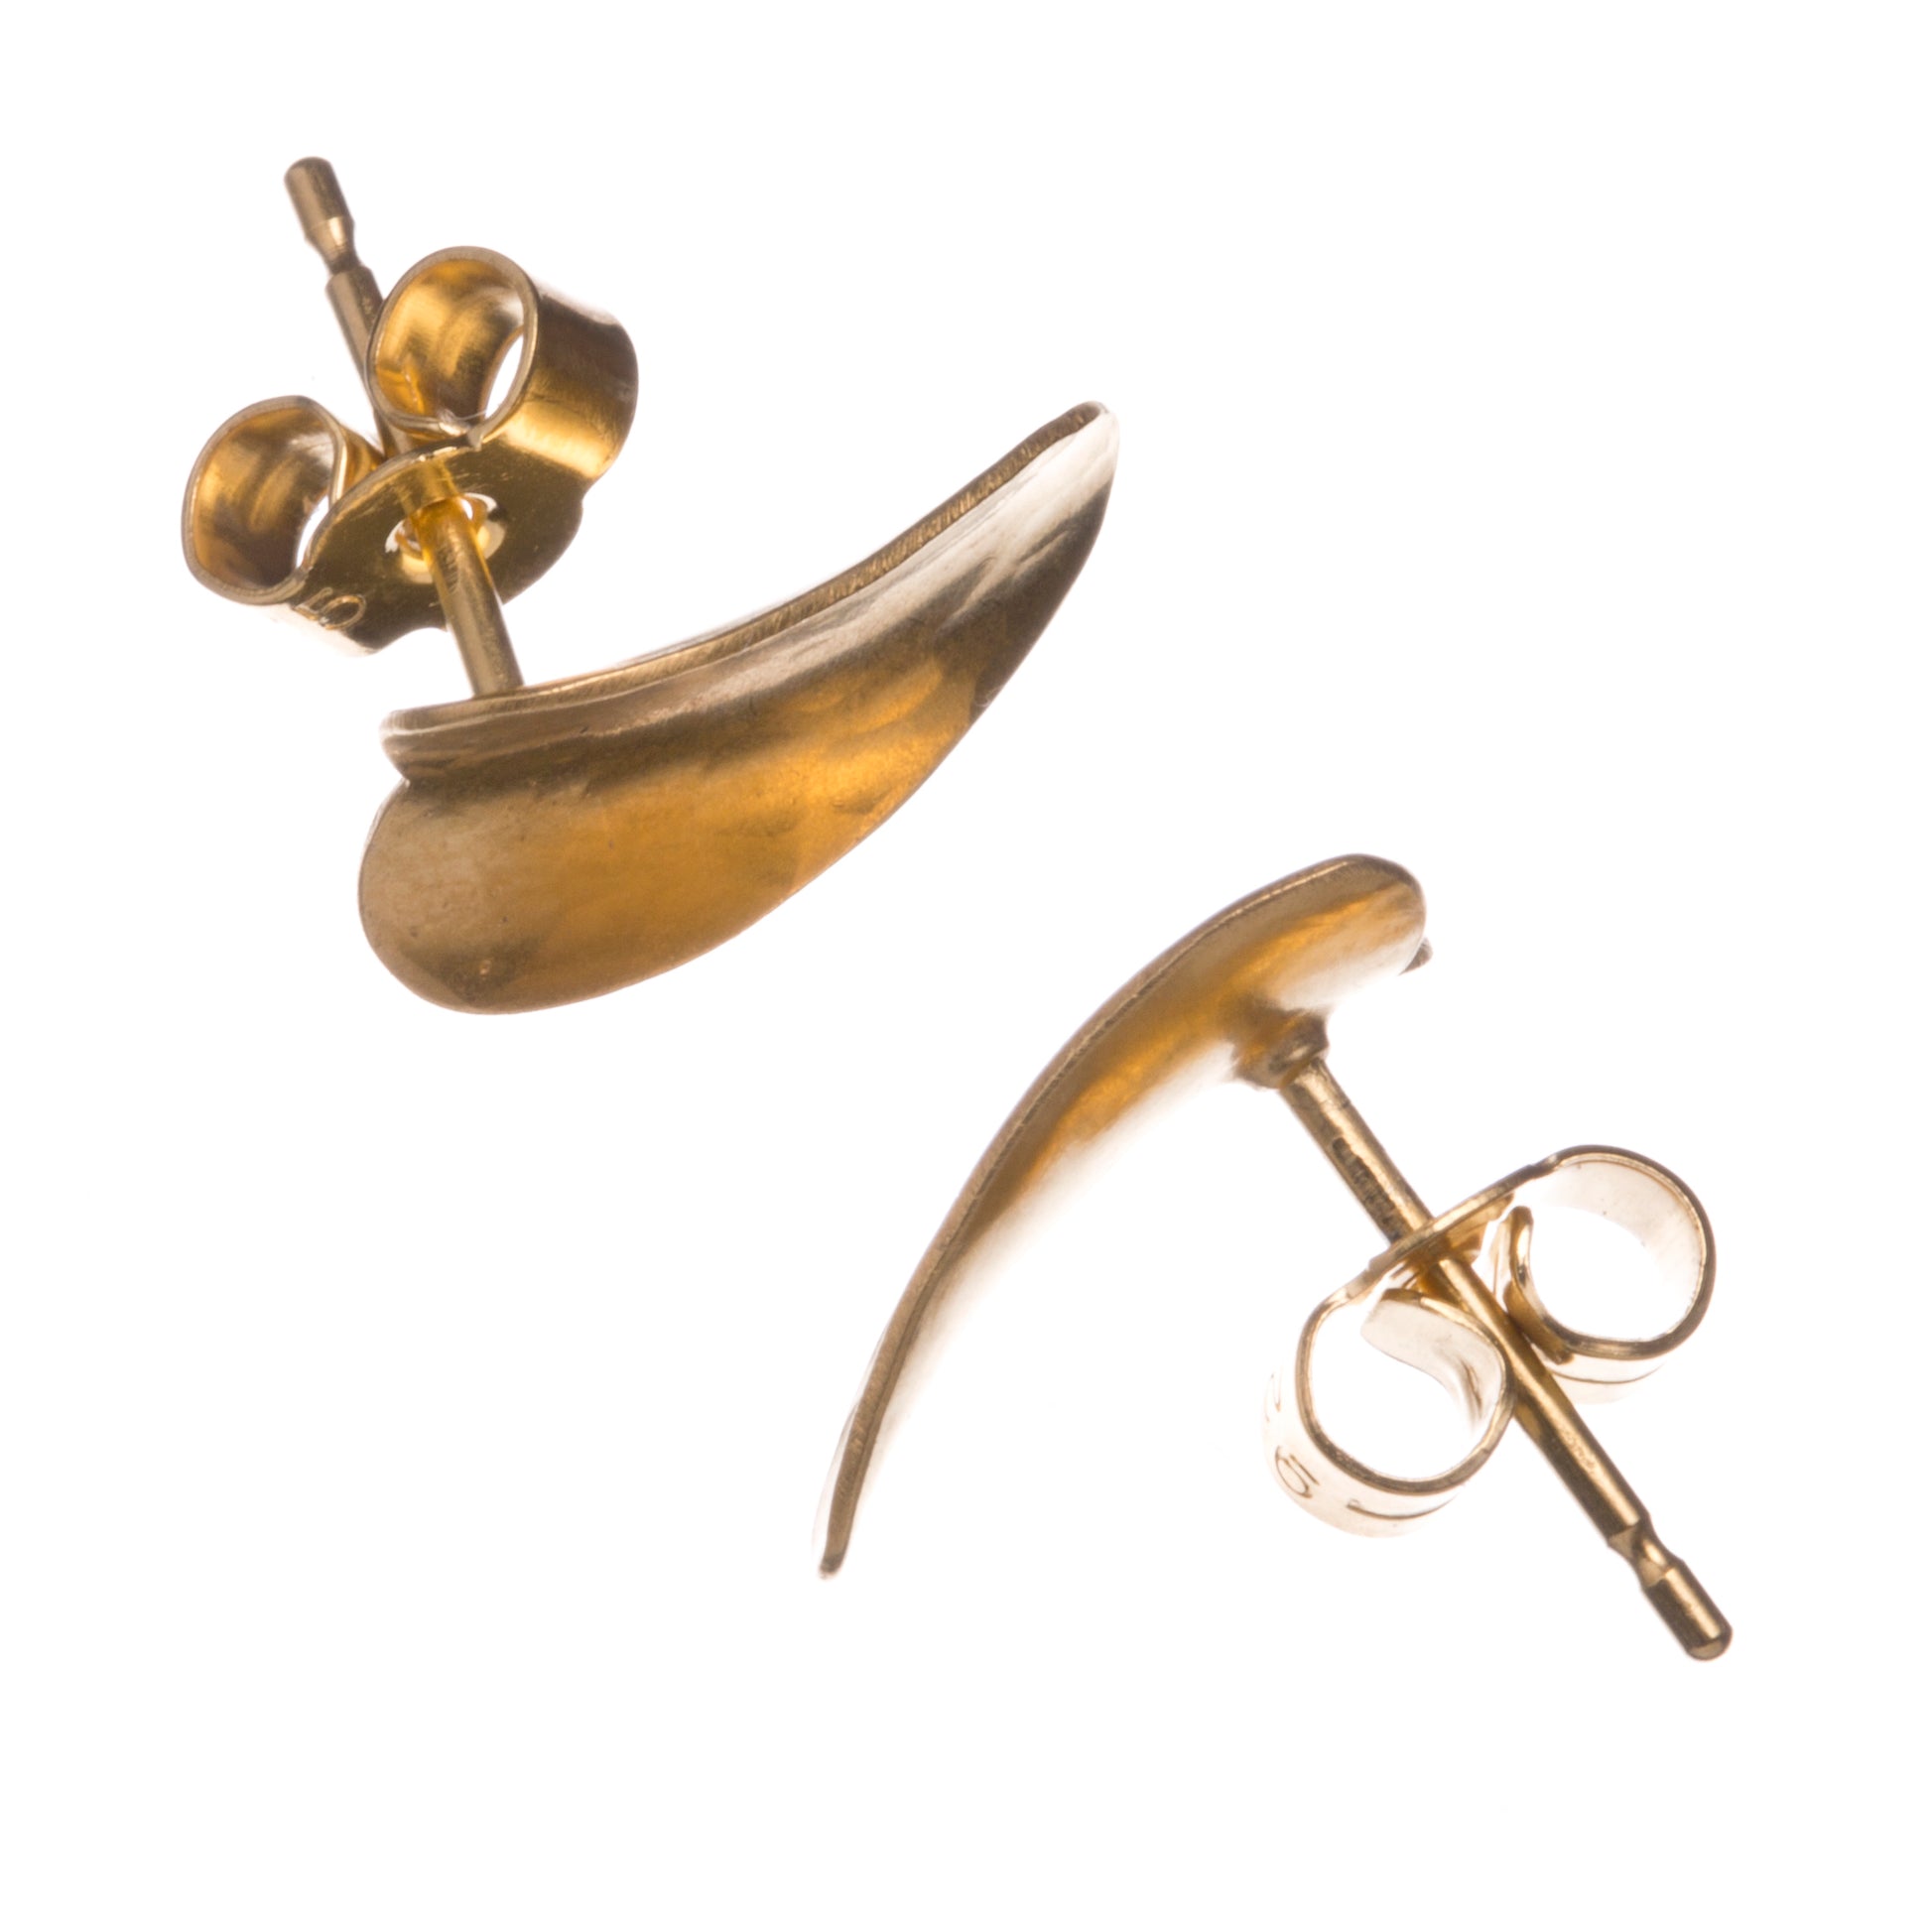 A pair of simple silver heart stud earrings, gold plated, showing the satin-matte finish and the three-dimensional curves.